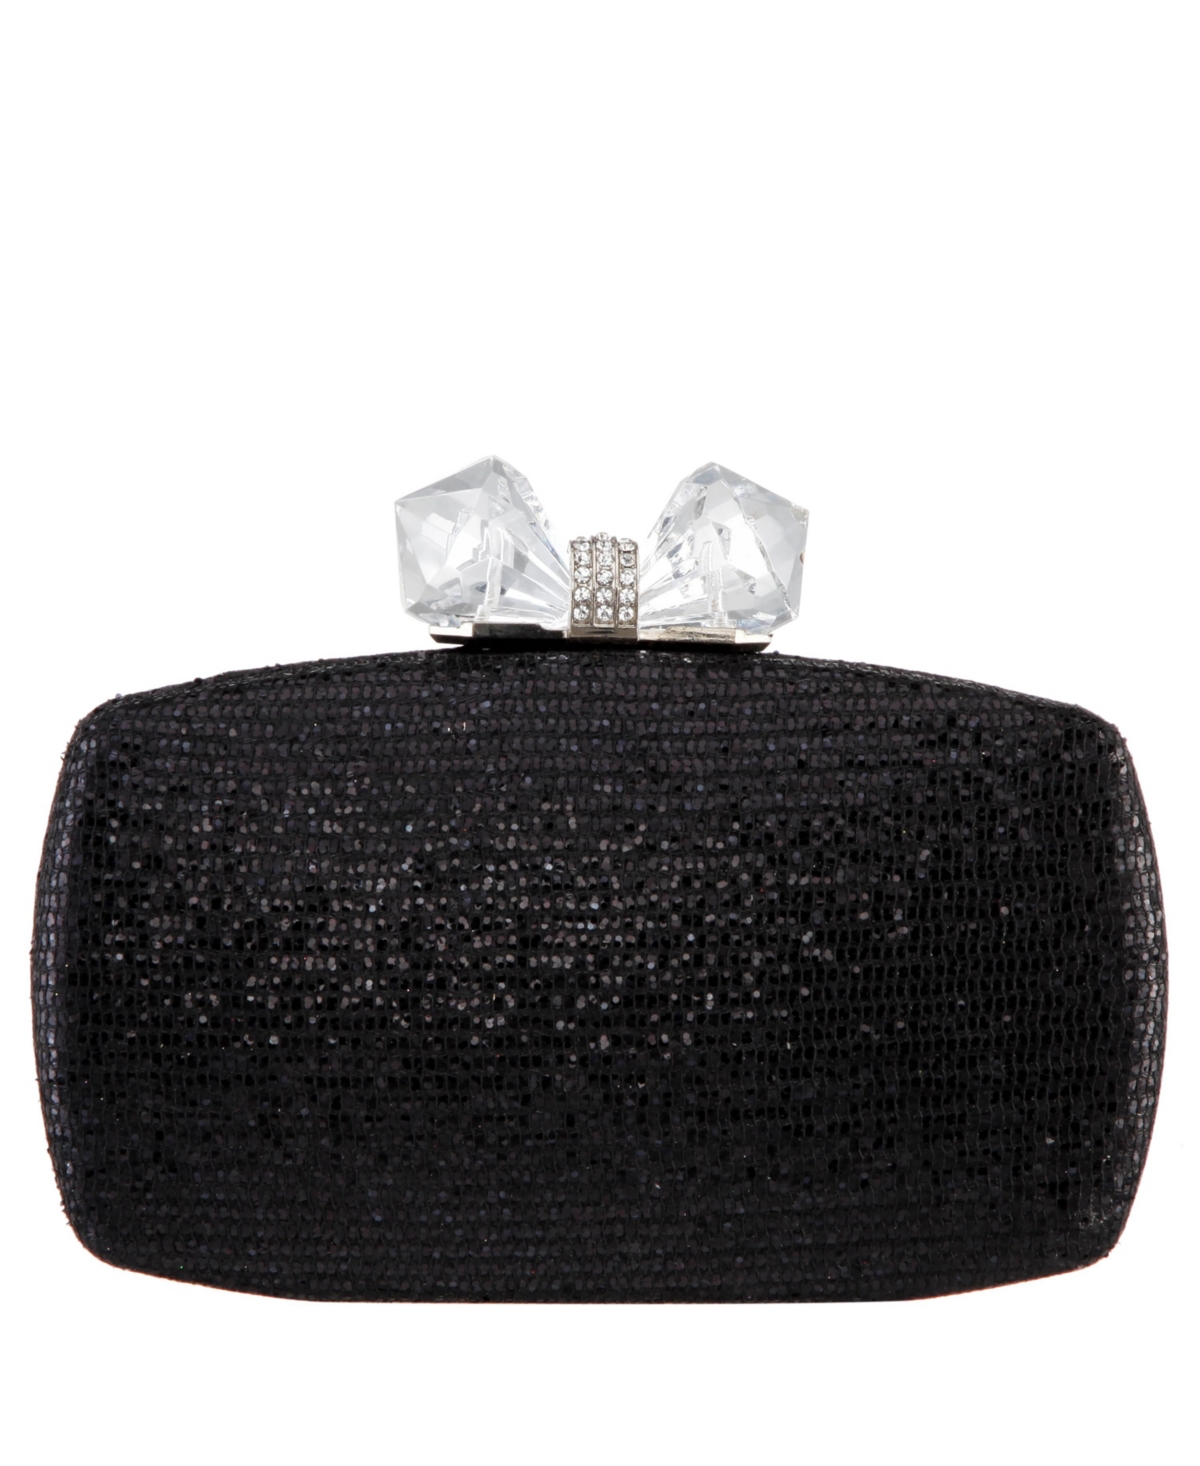 Women's Glitter Minaudiere With Crystal Bow Clasp - Black